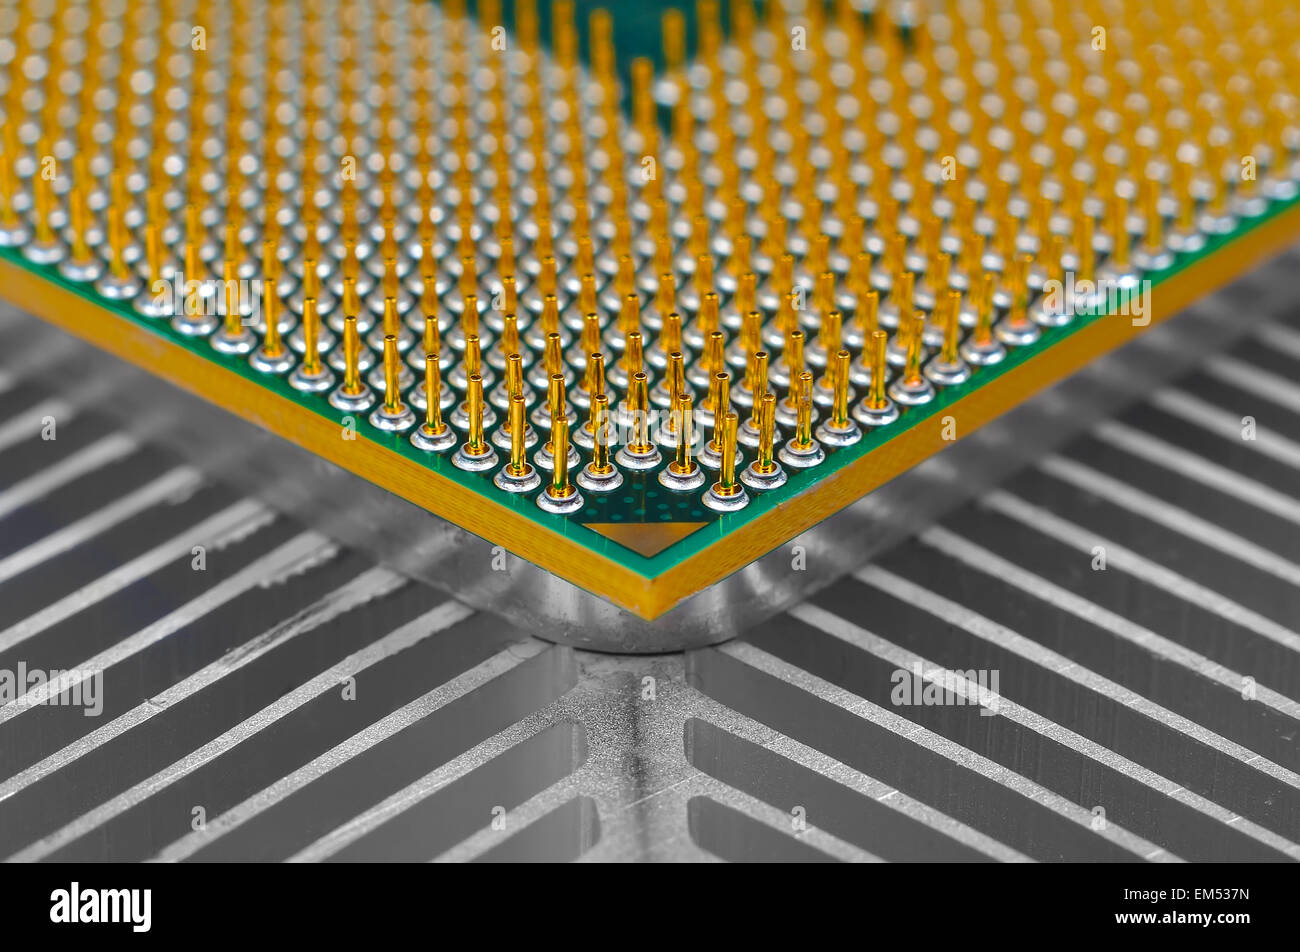 Computer CPU processor on cooling pad, close up Stock Photo